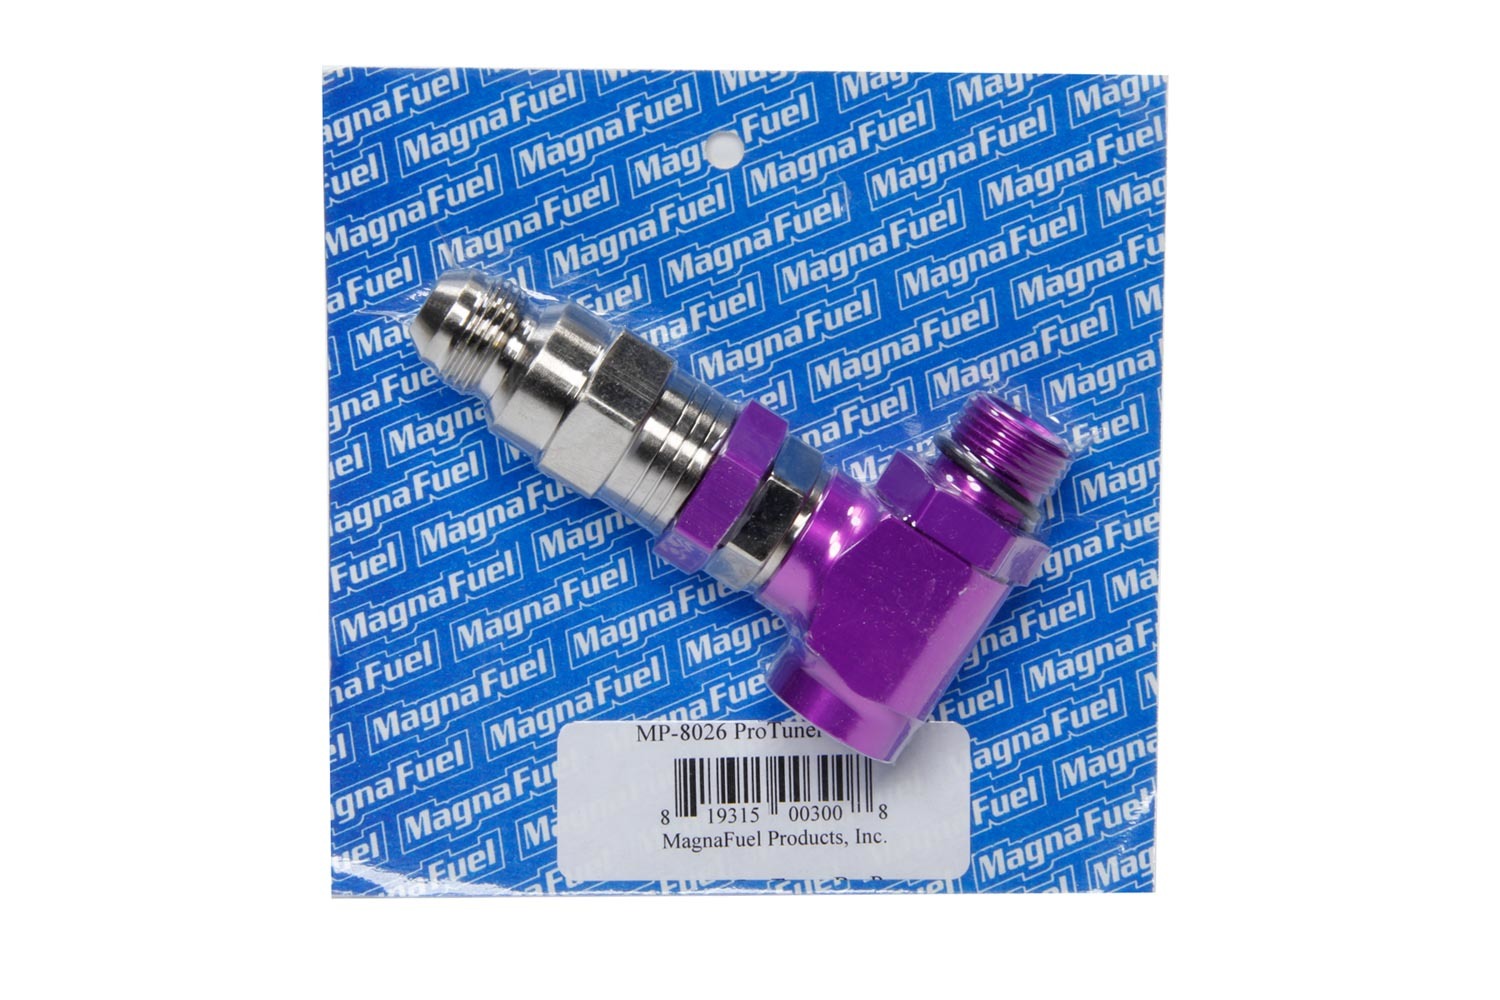 Magnafuel MP-8026 Fuel Bypass Valve, Adjustable, 18 to 35 psi, 8 AN O-Ring Male Inlet, 8 AN Female O-Ring Outlet, 8 AN O-Ring Male Return, Aluminum, Purple Anodized / Zinc Anodized, Each